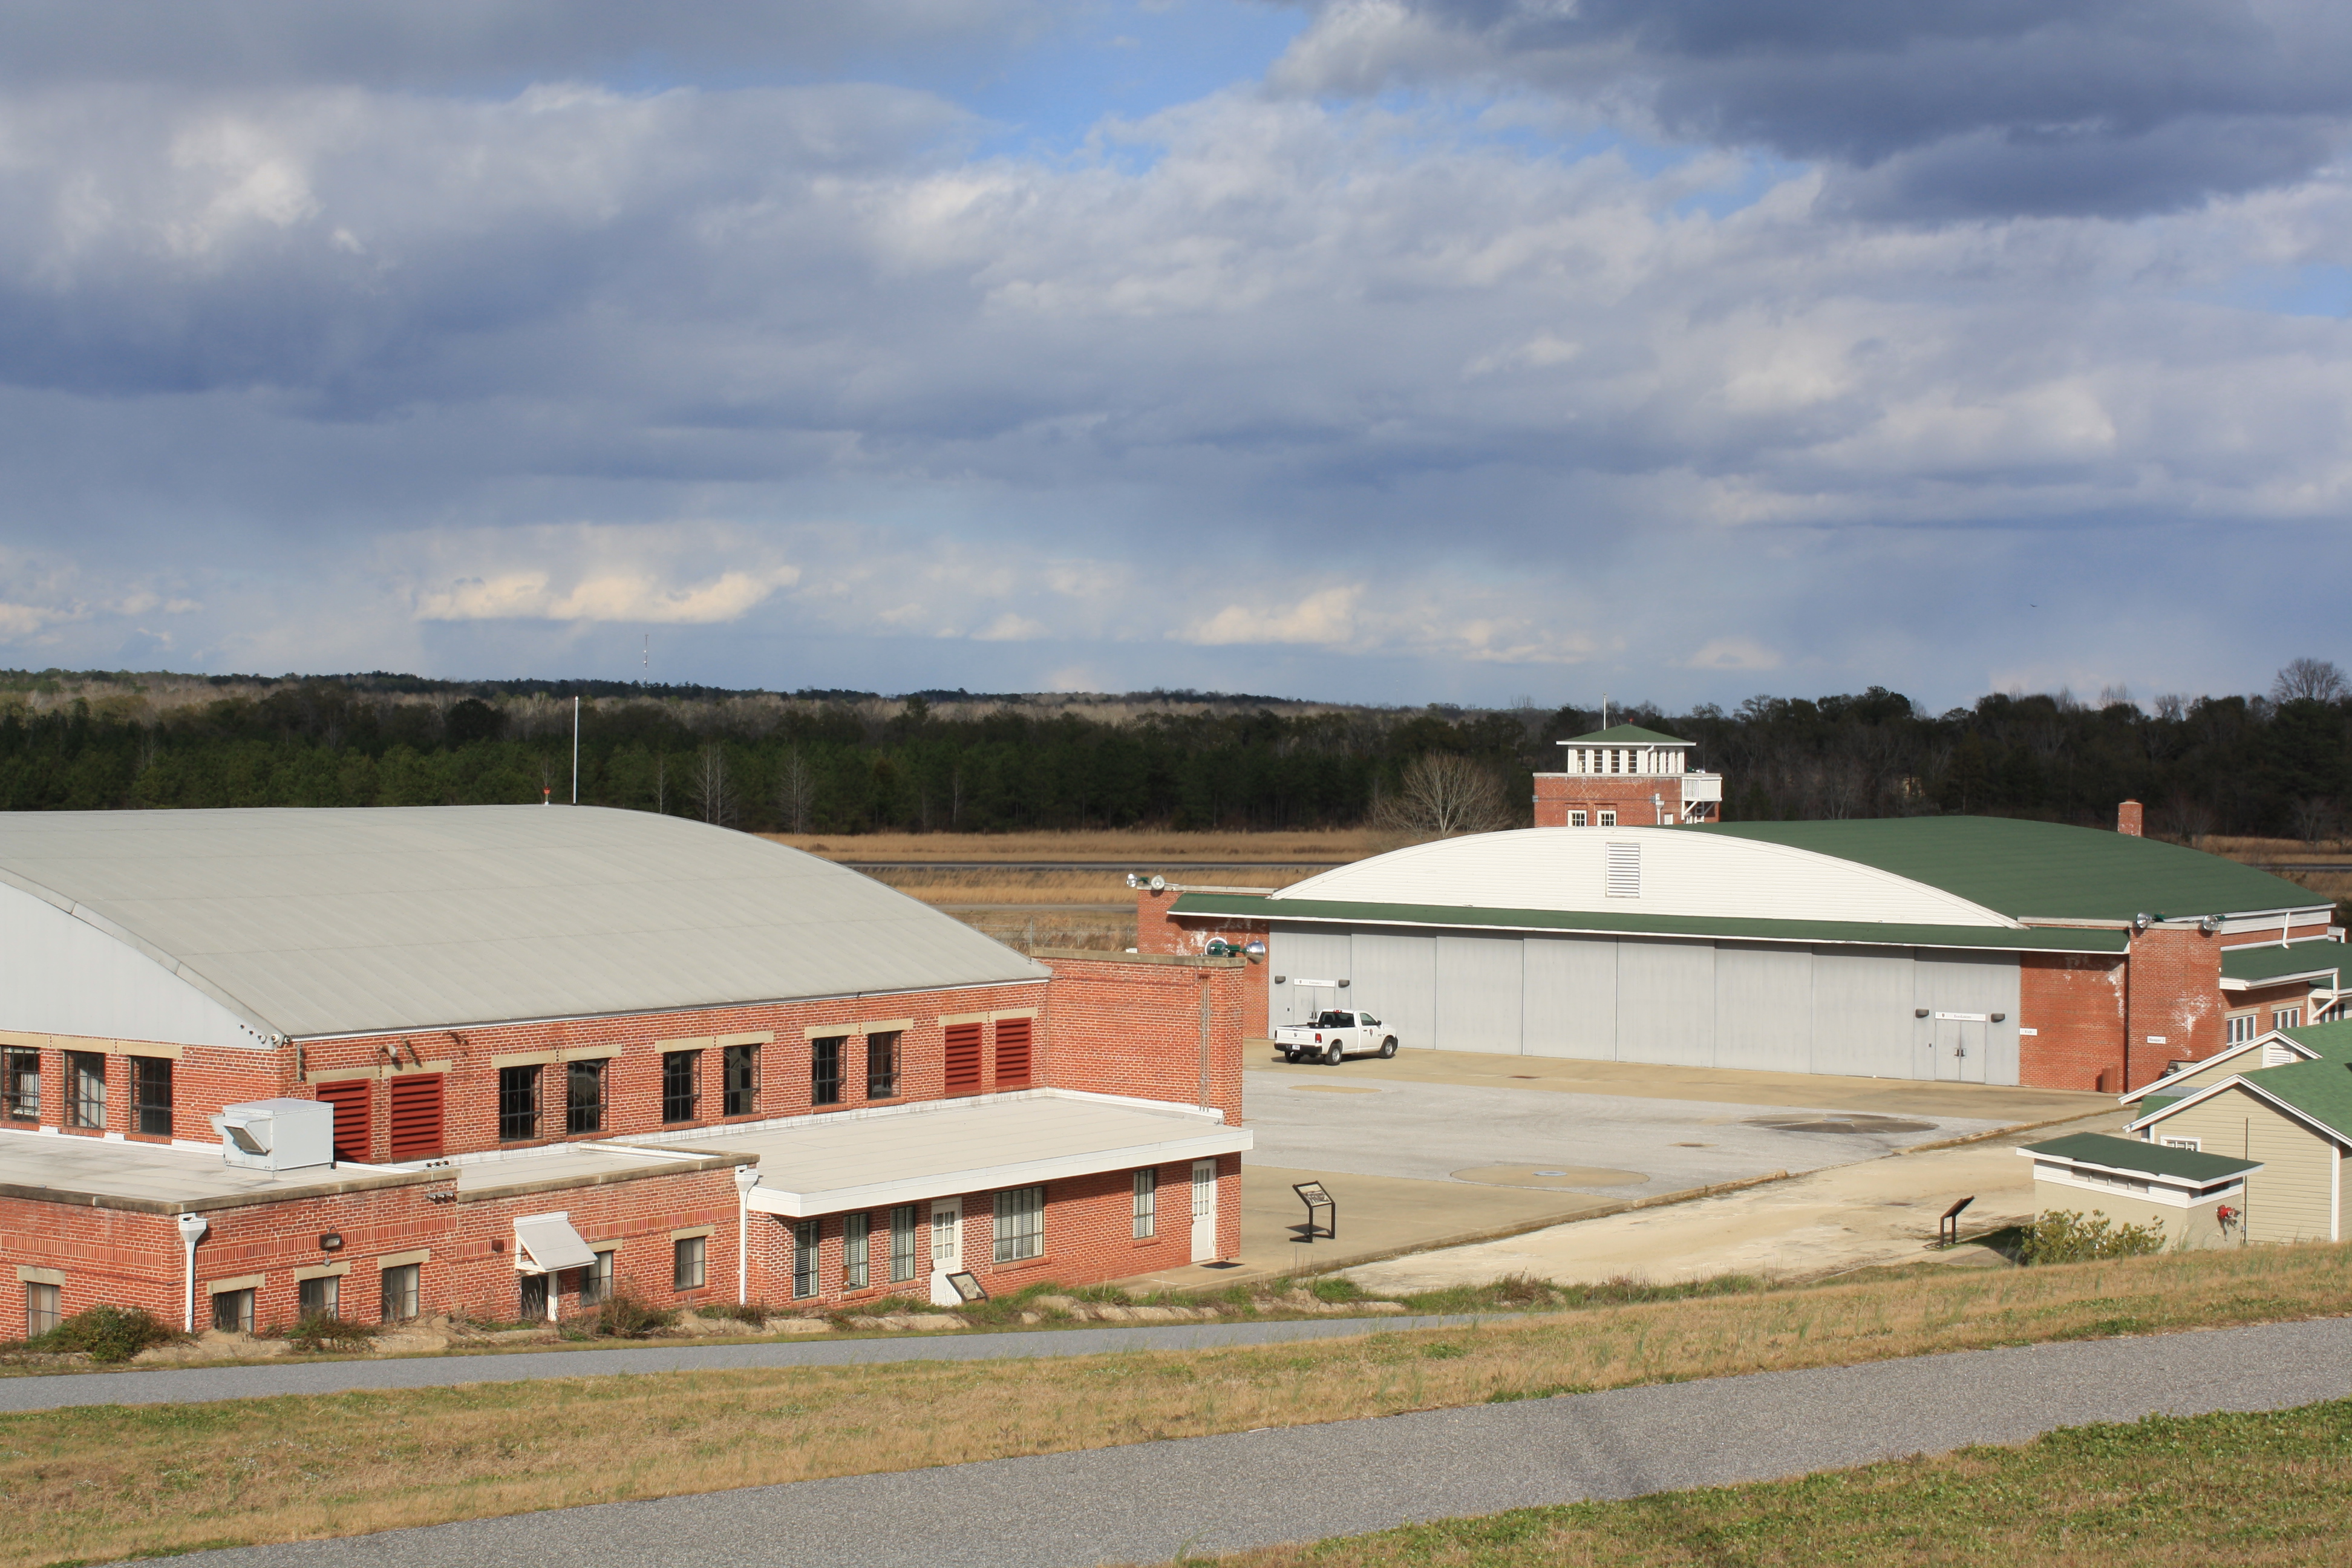 Two airplane hangars - Hangar #1 in foreground and Hangar #2 in background at Moton Field.